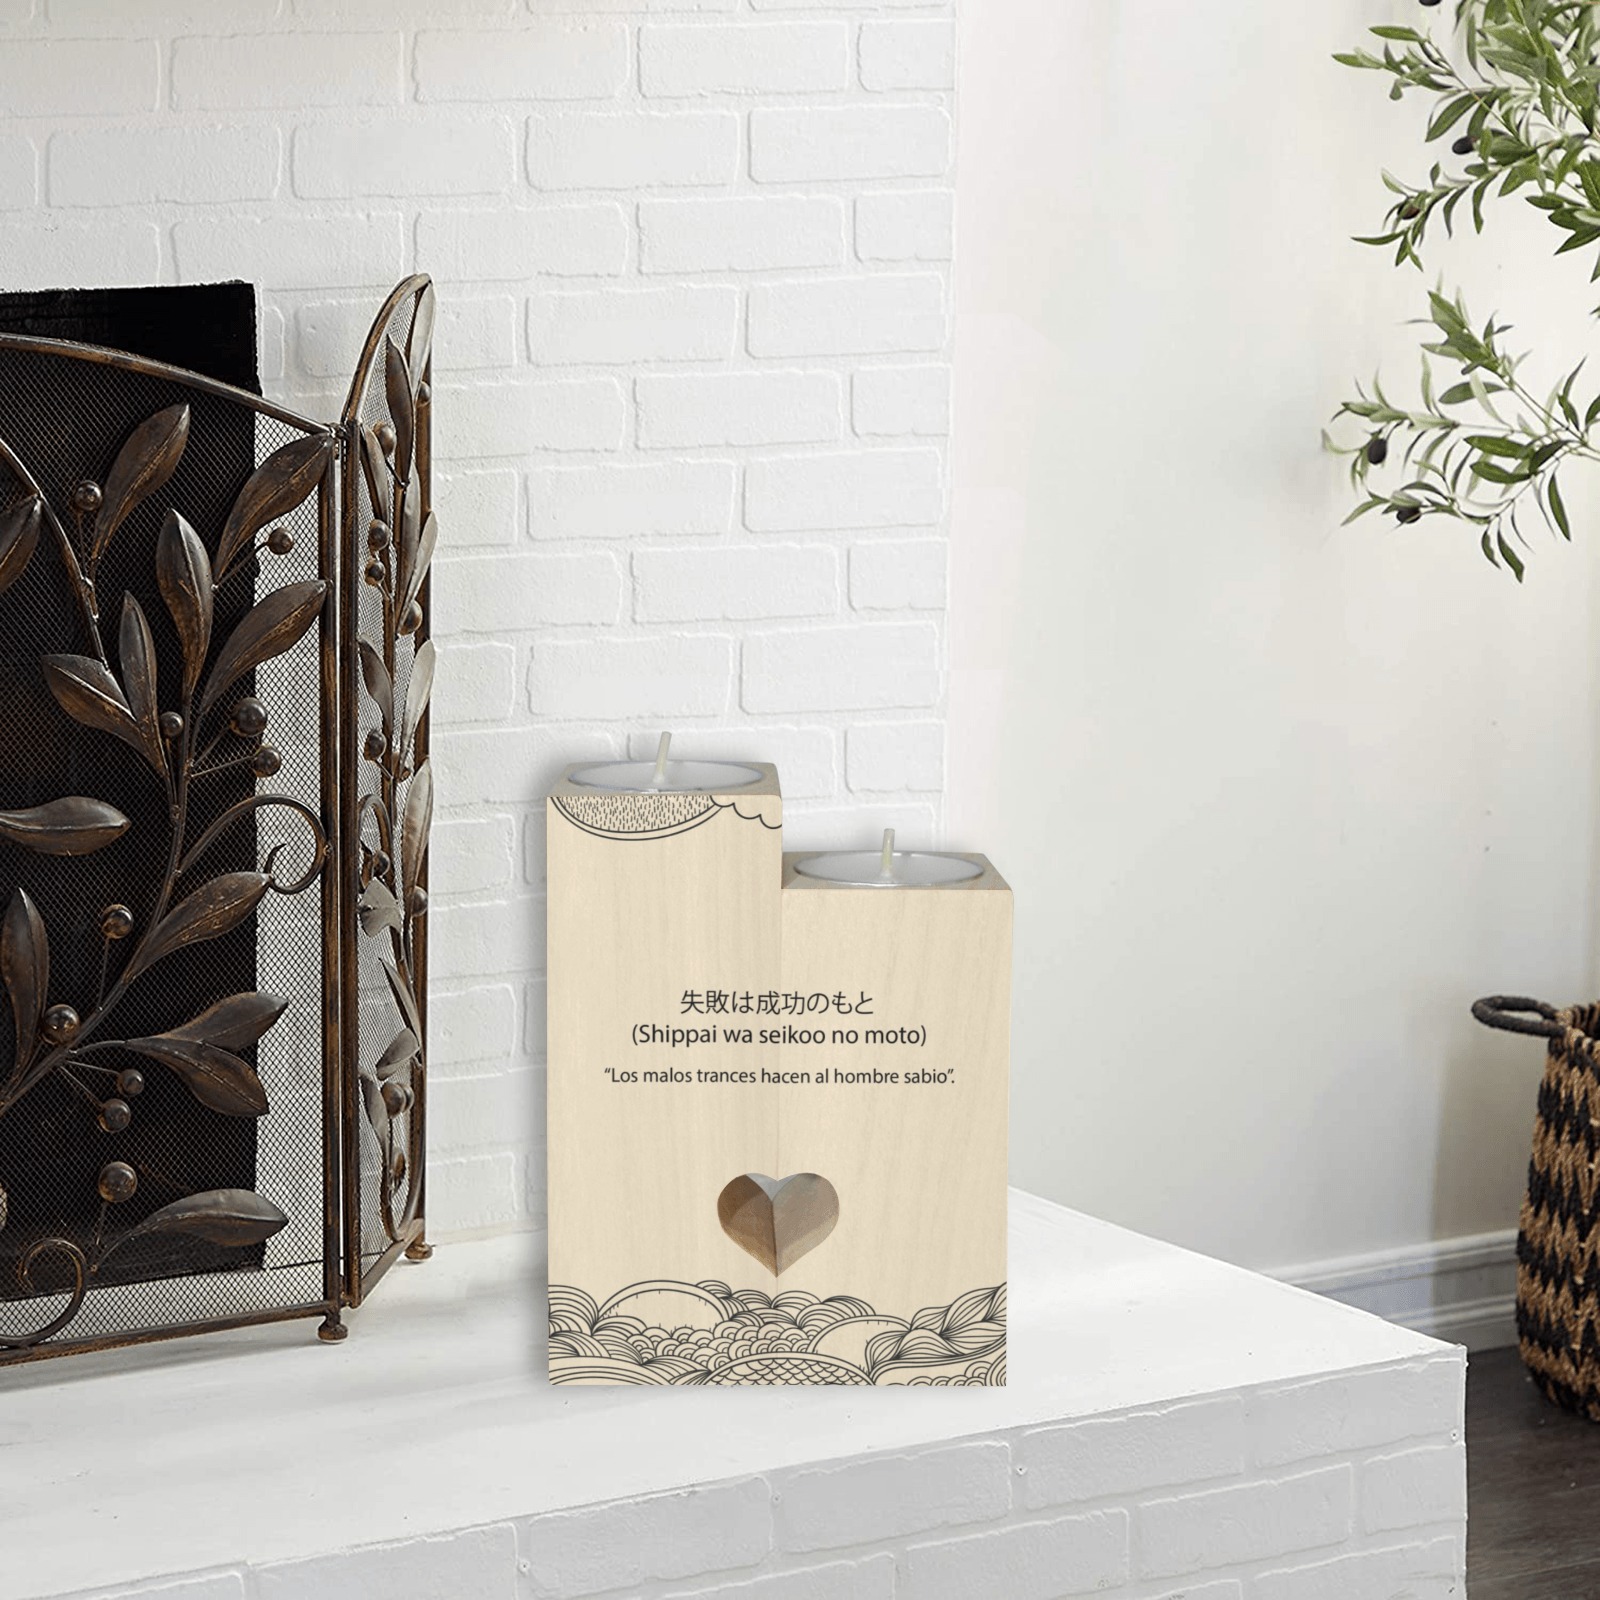 DOBLE VELA CORAZON FRASES PARA TI - M1 Wooden Candle Holder (Without Candle)